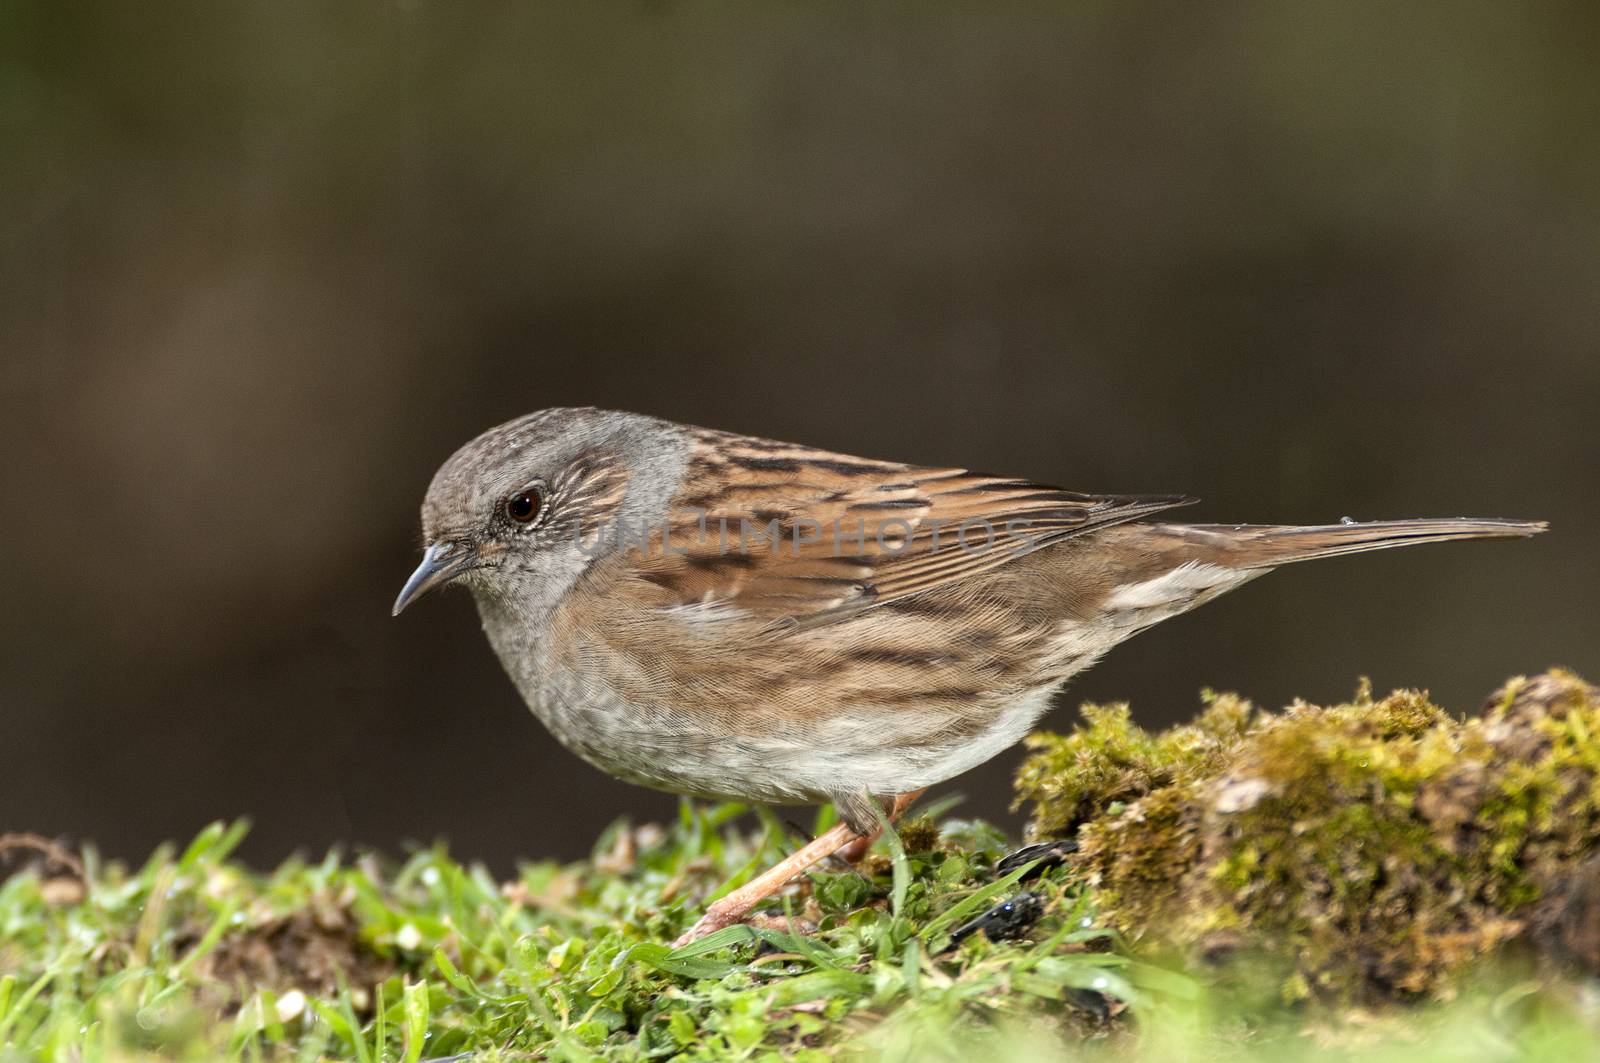 Dunnock (Prunella modularis), Looking for food in the field  by jalonsohu@gmail.com